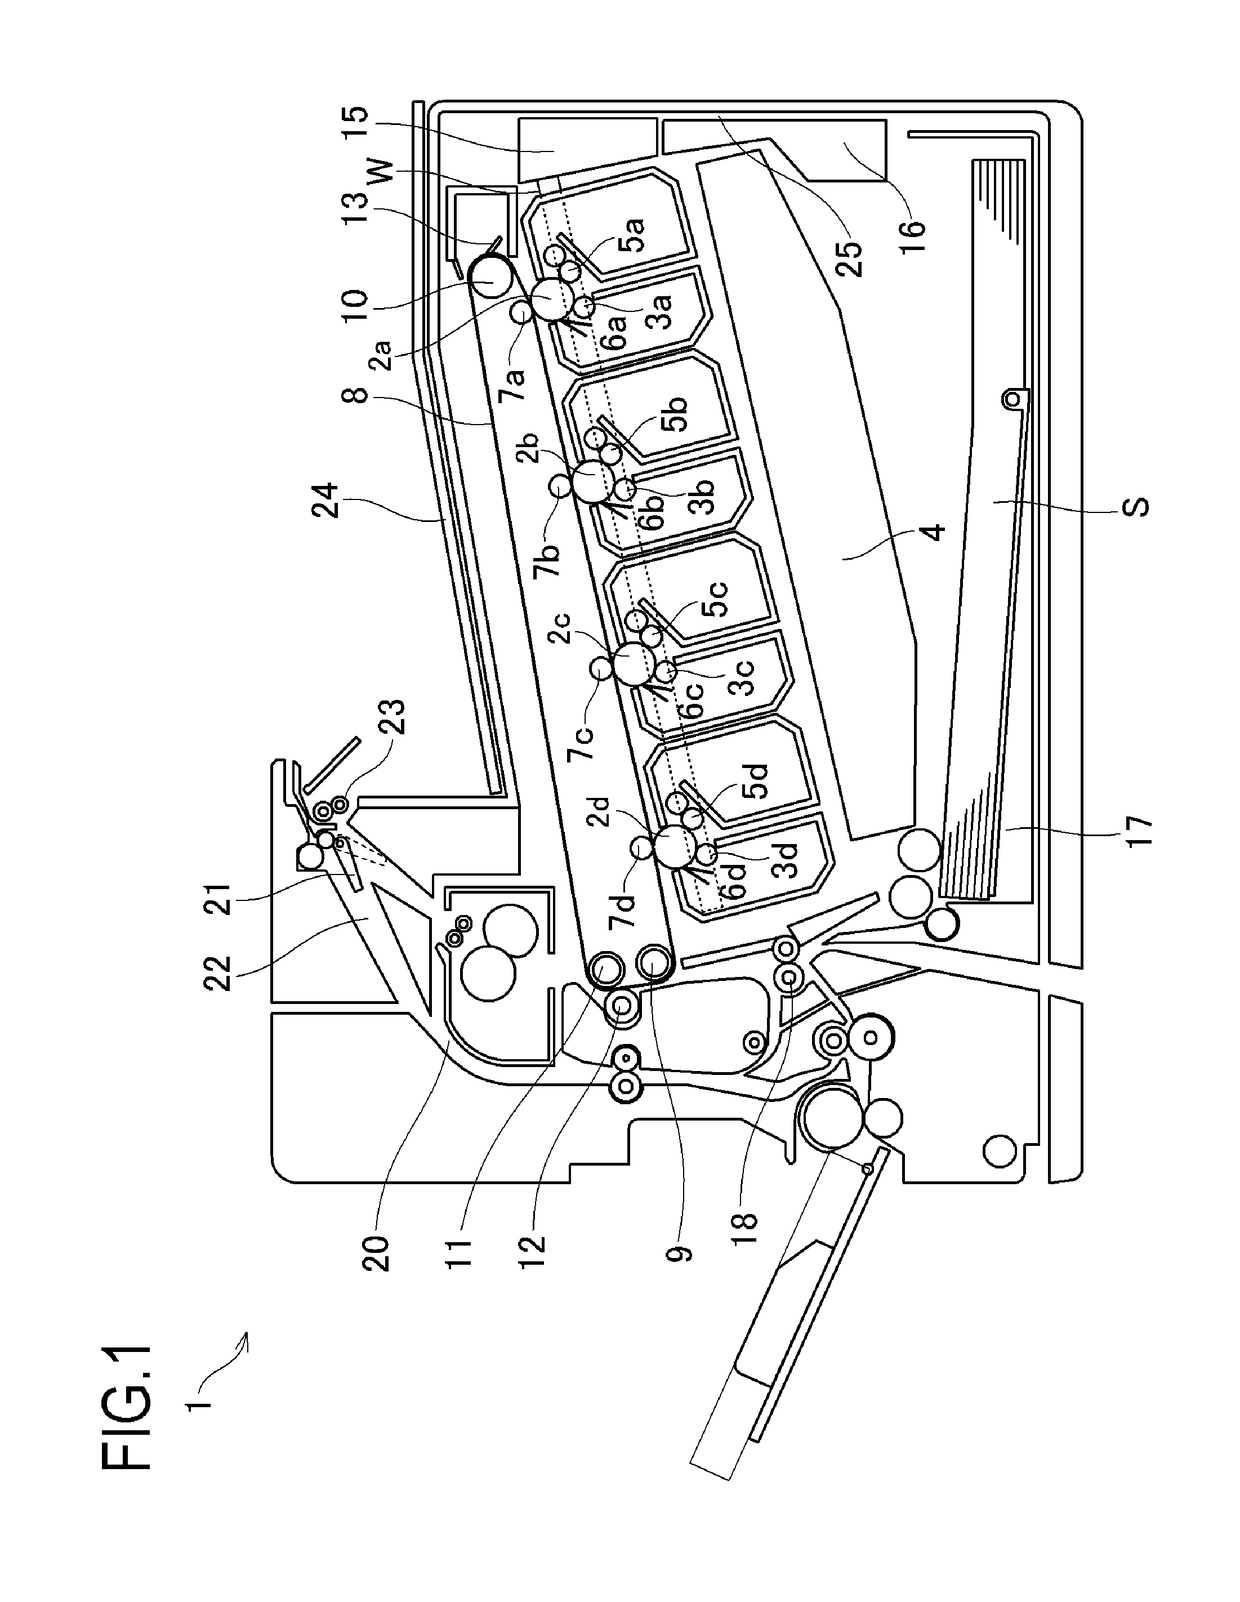 Toner transport mechanism and image forming apparatus